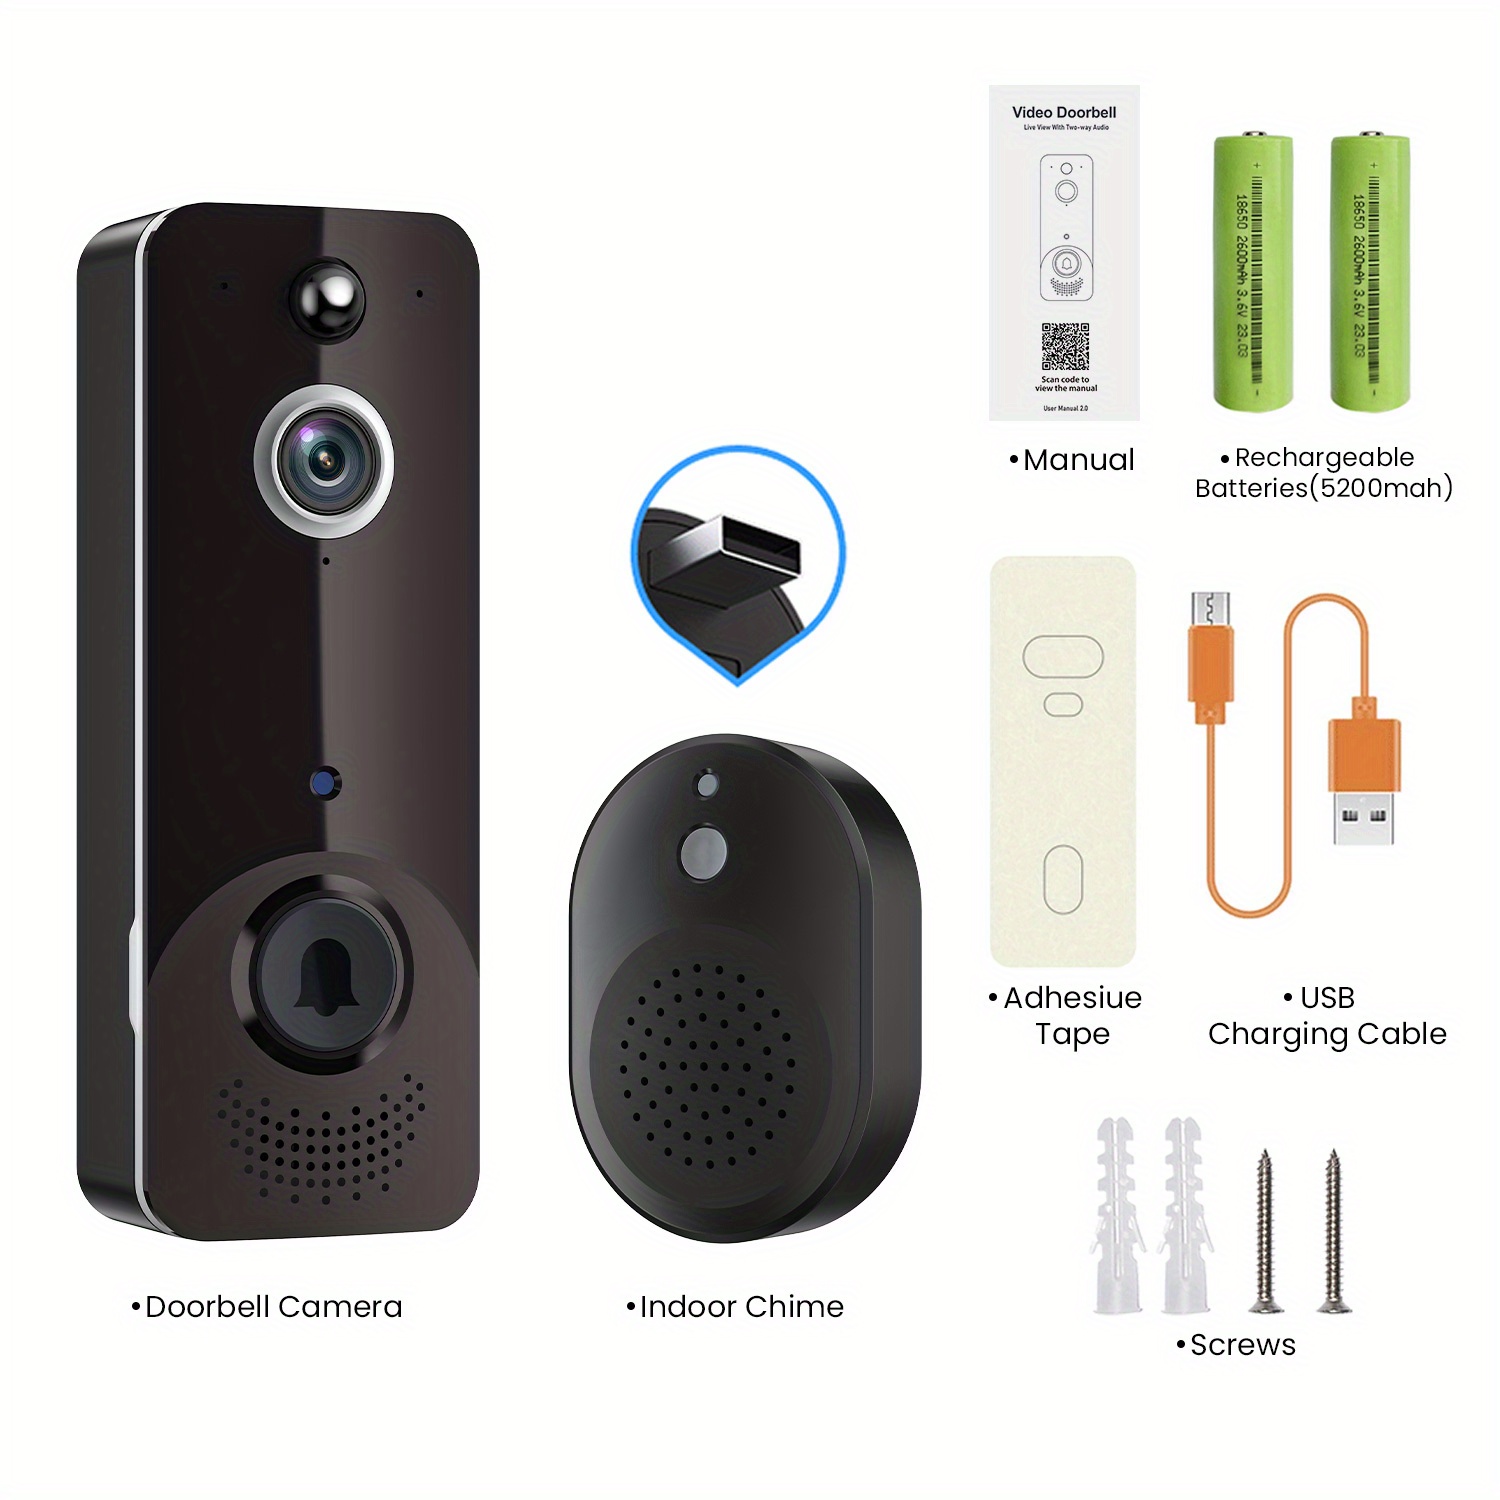 smart wireless doorbell camera with rechargeable batteries 2 way audio ai human detection pir motion detector 2 4g wifi hd live image night vision instant alerts cloud storage chime home security system details 4